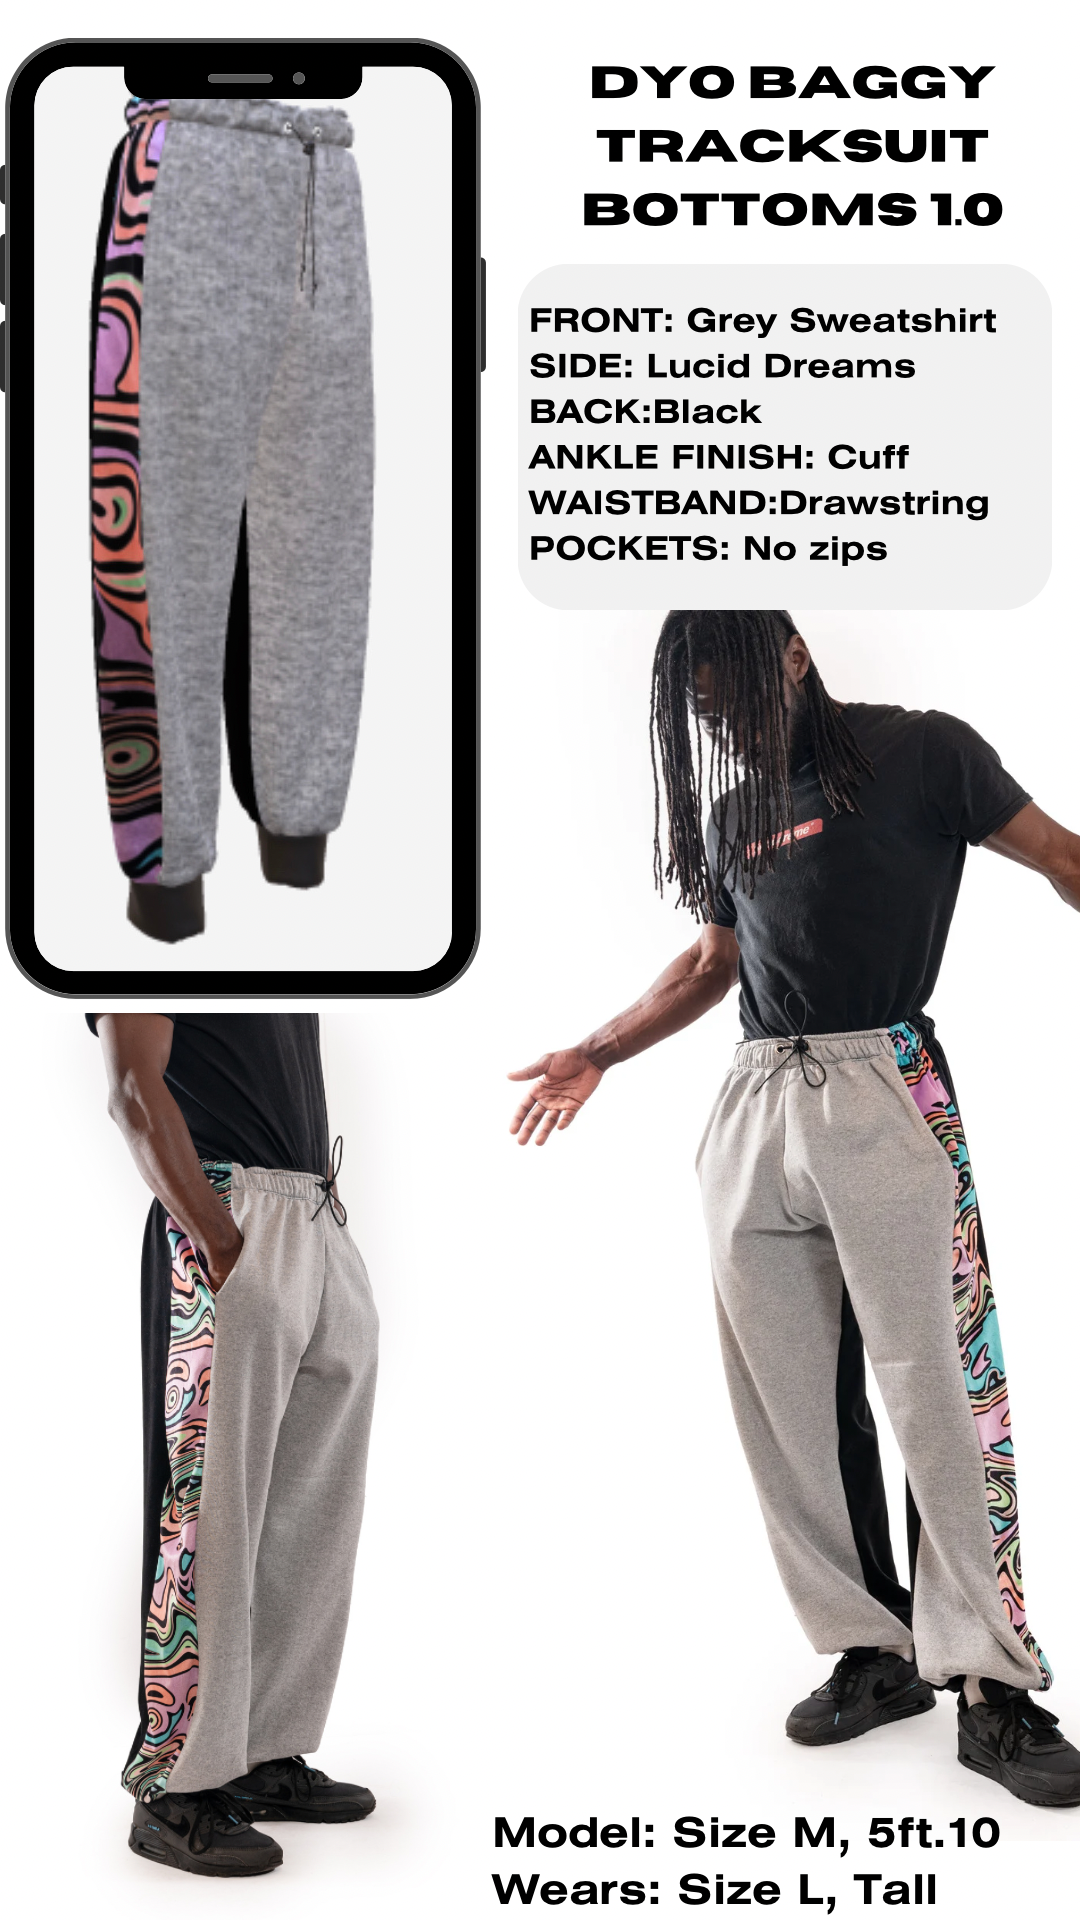 DYO Baggy Side Panel Tracksuit Bottoms 1.0